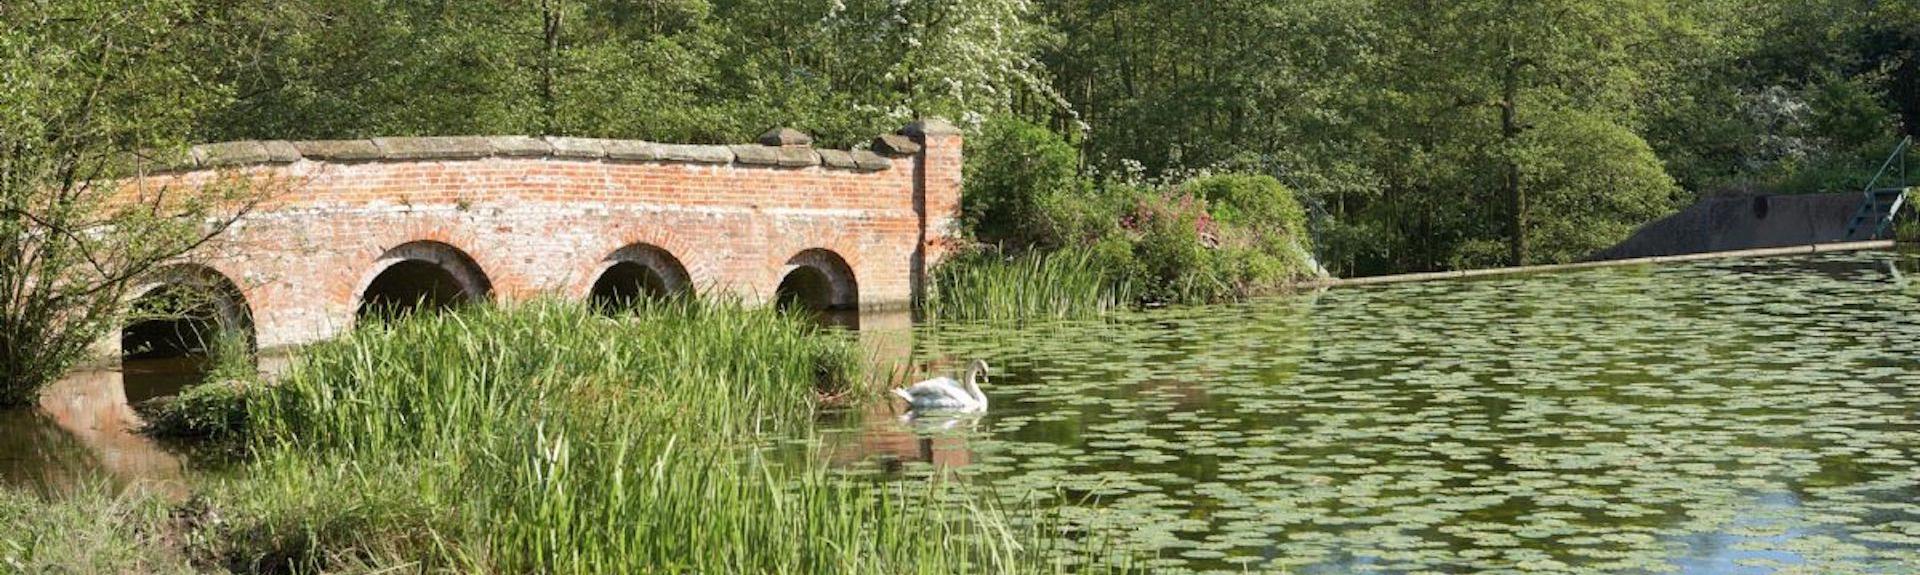 Discover Beautiful Rural Corners in the Leicestershire Countryside Around. Ashby-de-la-Zouch